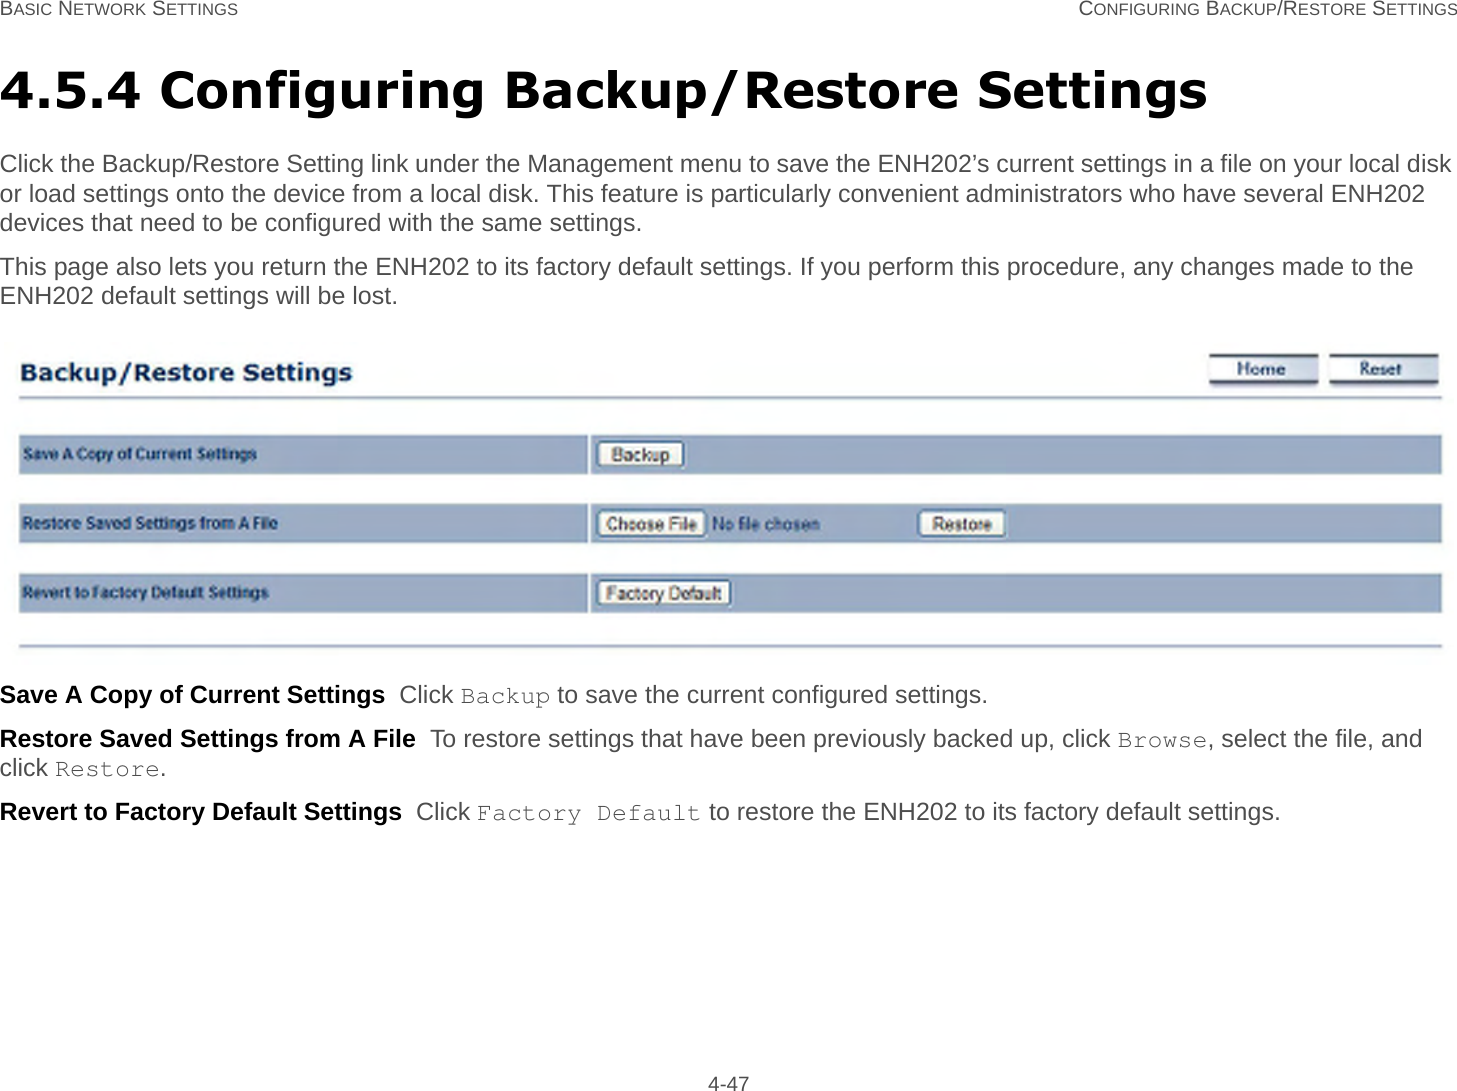 BASIC NETWORK SETTINGS CONFIGURING BACKUP/RESTORE SETTINGS 4-474.5.4 Configuring Backup/Restore SettingsClick the Backup/Restore Setting link under the Management menu to save the ENH202’s current settings in a file on your local disk or load settings onto the device from a local disk. This feature is particularly convenient administrators who have several ENH202 devices that need to be configured with the same settings.This page also lets you return the ENH202 to its factory default settings. If you perform this procedure, any changes made to the ENH202 default settings will be lost.Save A Copy of Current Settings  Click Backup to save the current configured settings.Restore Saved Settings from A File  To restore settings that have been previously backed up, click Browse, select the file, and click Restore.Revert to Factory Default Settings  Click Factory Default to restore the ENH202 to its factory default settings.